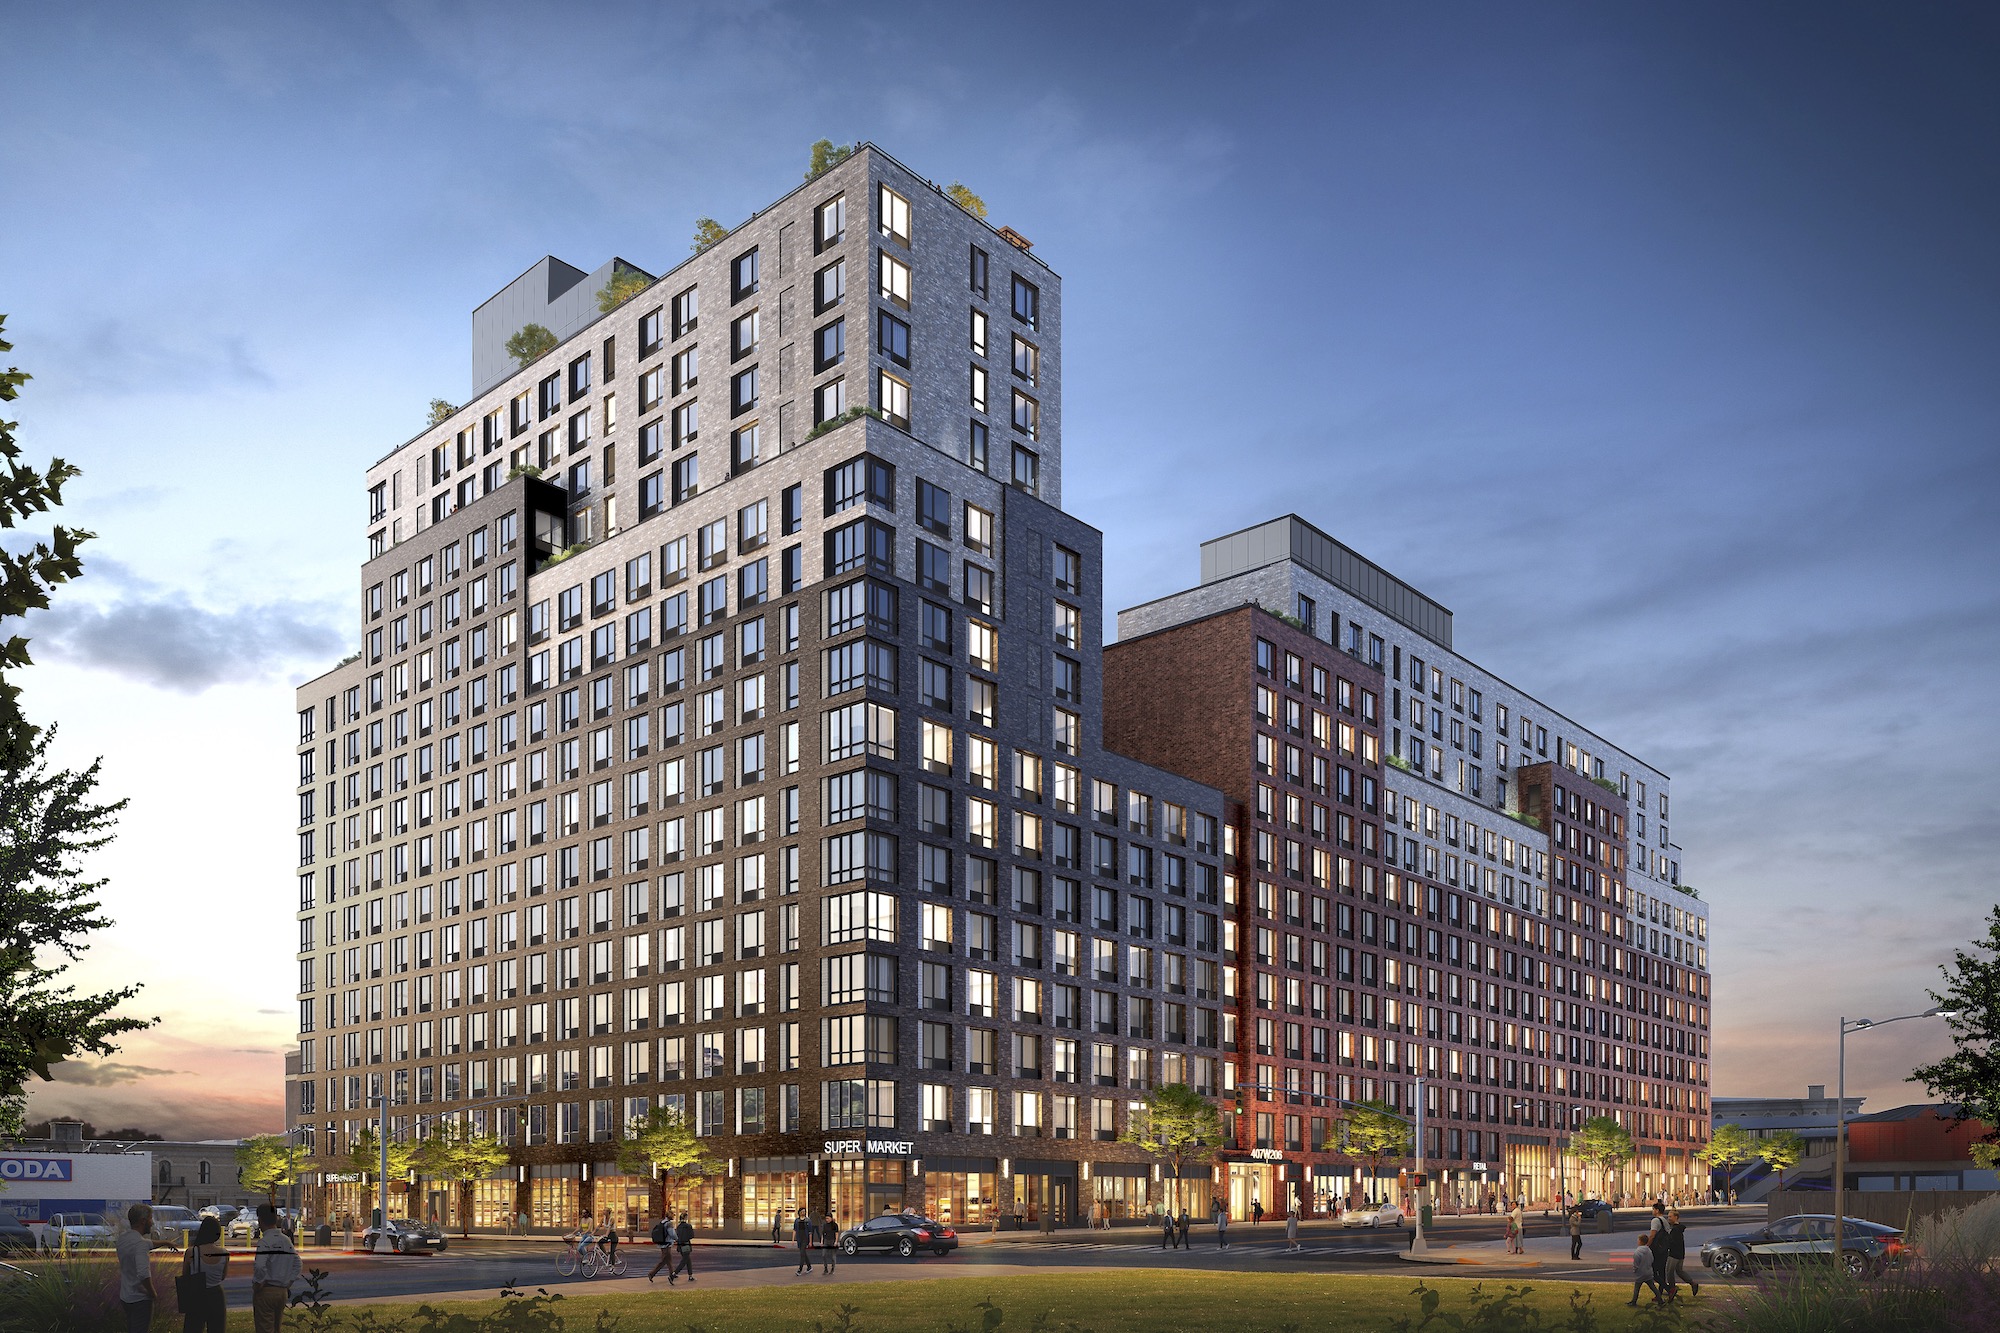 $416M mixed-use development will bring 700 new apartments to